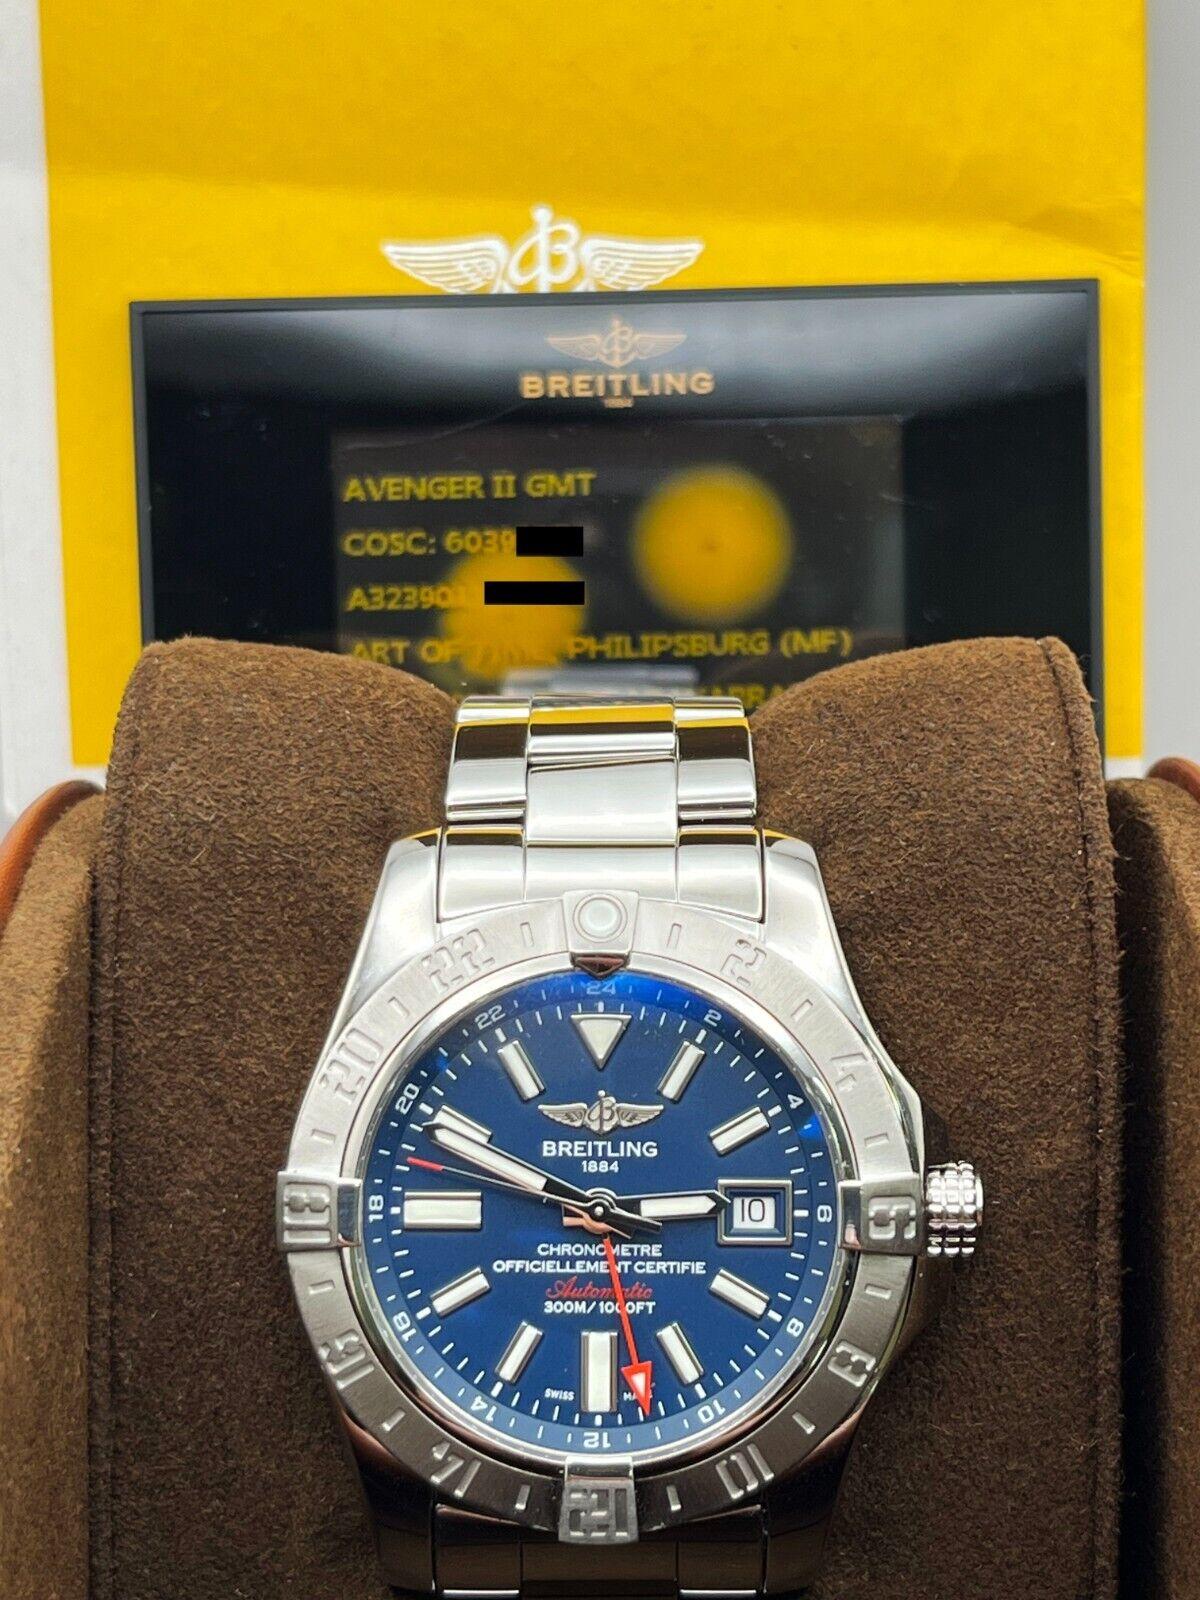 Breitling A32390 Avenger II GMT Blue Dial Stainless Steel Box Paper For Sale 5